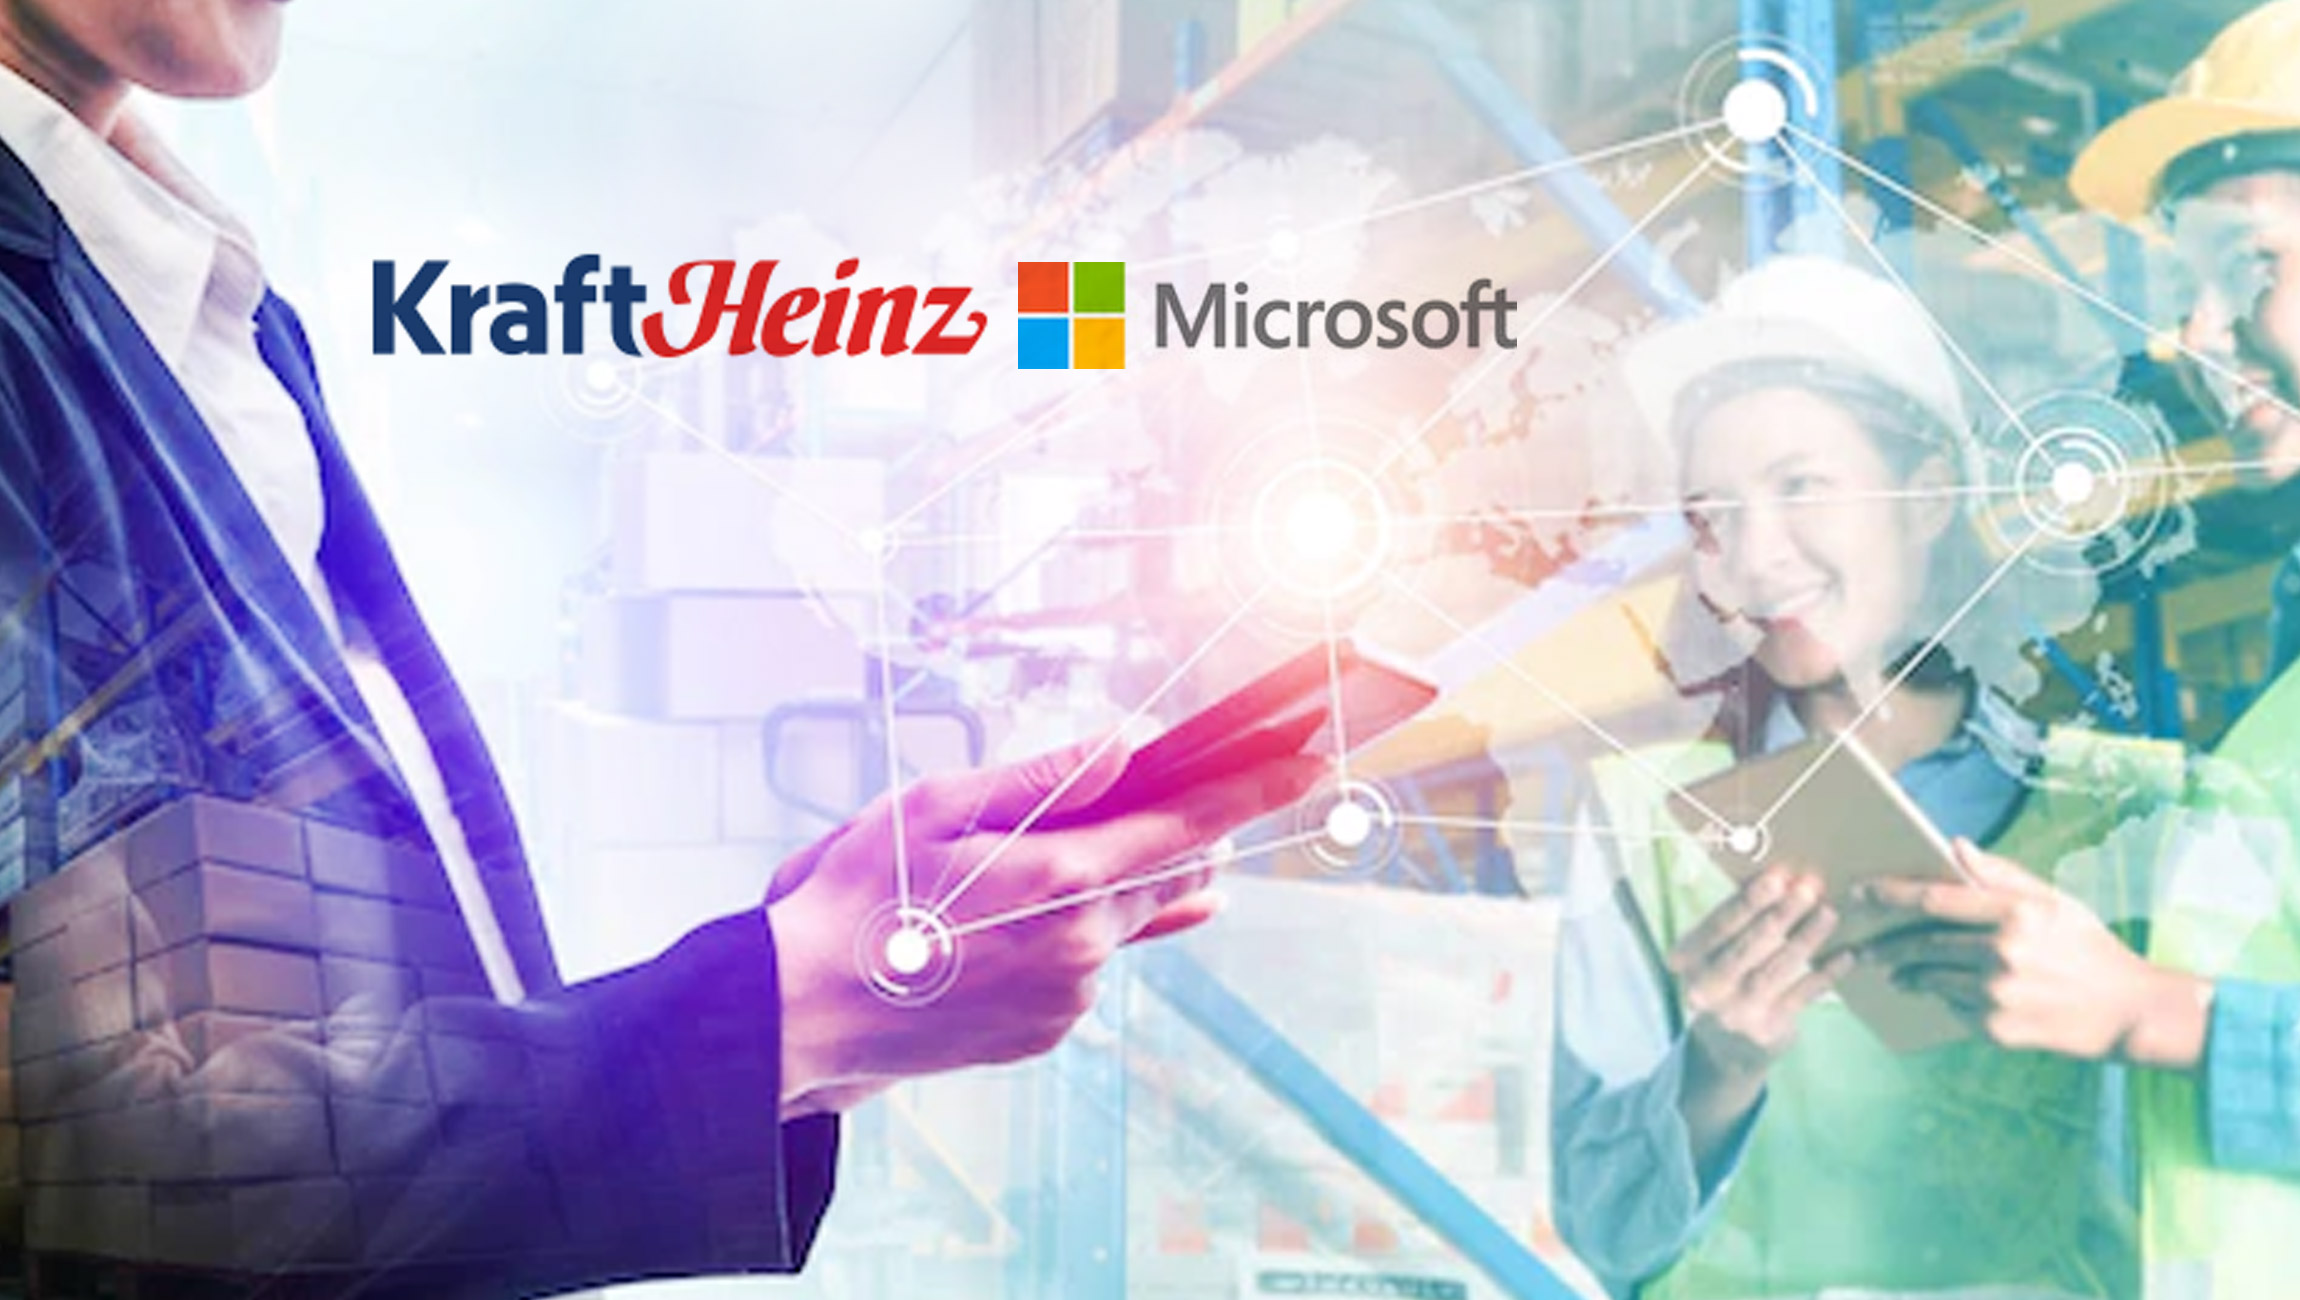 Kraft-Heinz-and-Microsoft-join-forces-to-accelerate-supply-chain-innovation-as-part-of-broader-digital-transformation